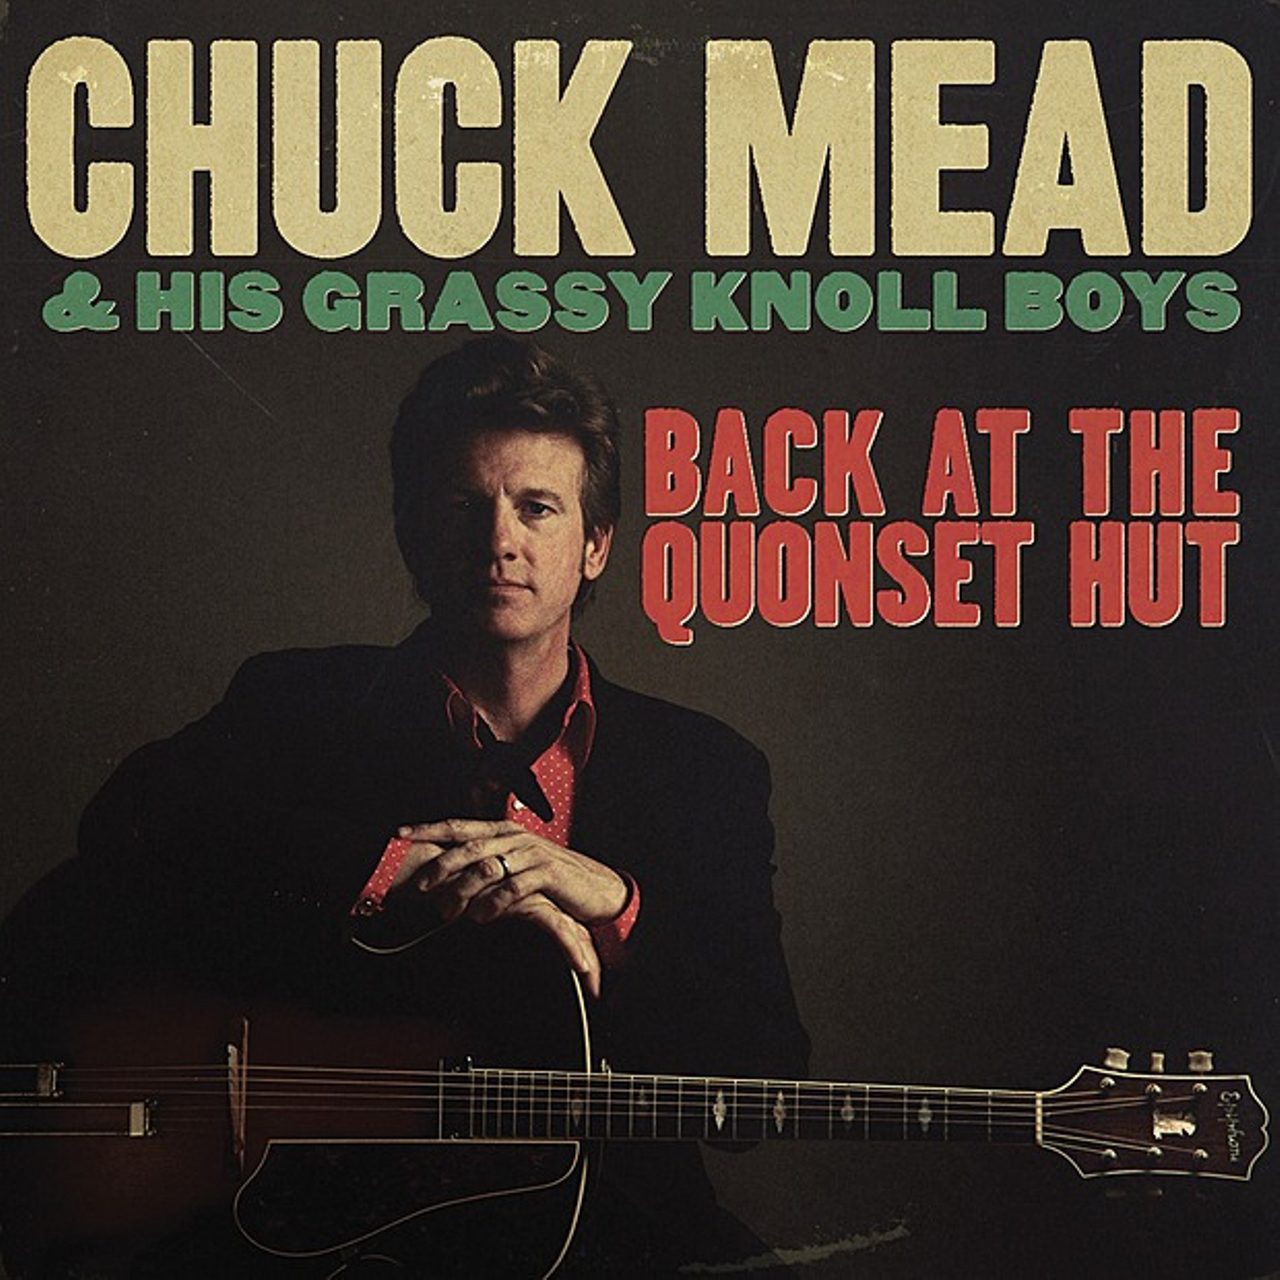 Chuck Mead & His Grassy Knoll Boys – Back At The Quonset Hut cover album